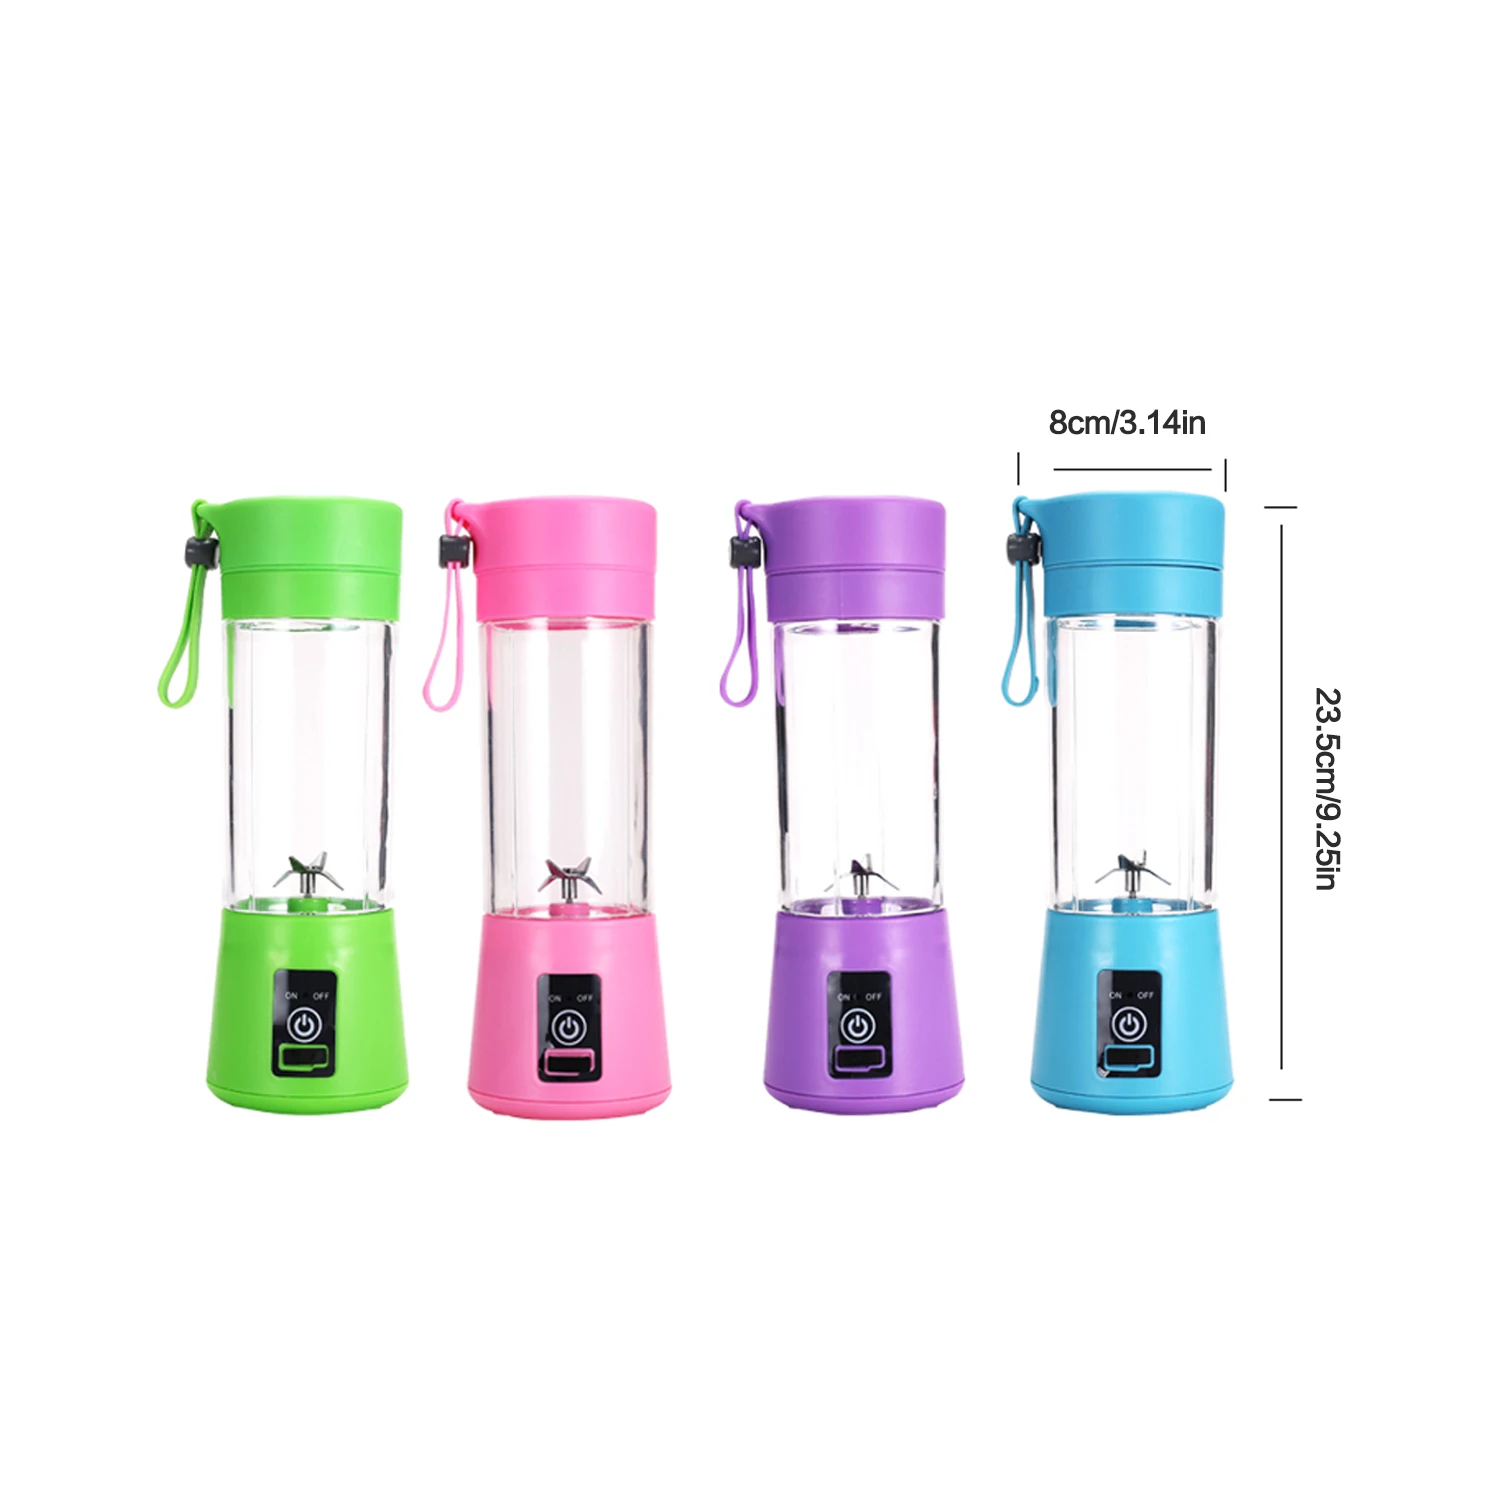 Dropship Personal Size Blender; Portable Blender; Battery Powered USB  Blender to Sell Online at a Lower Price